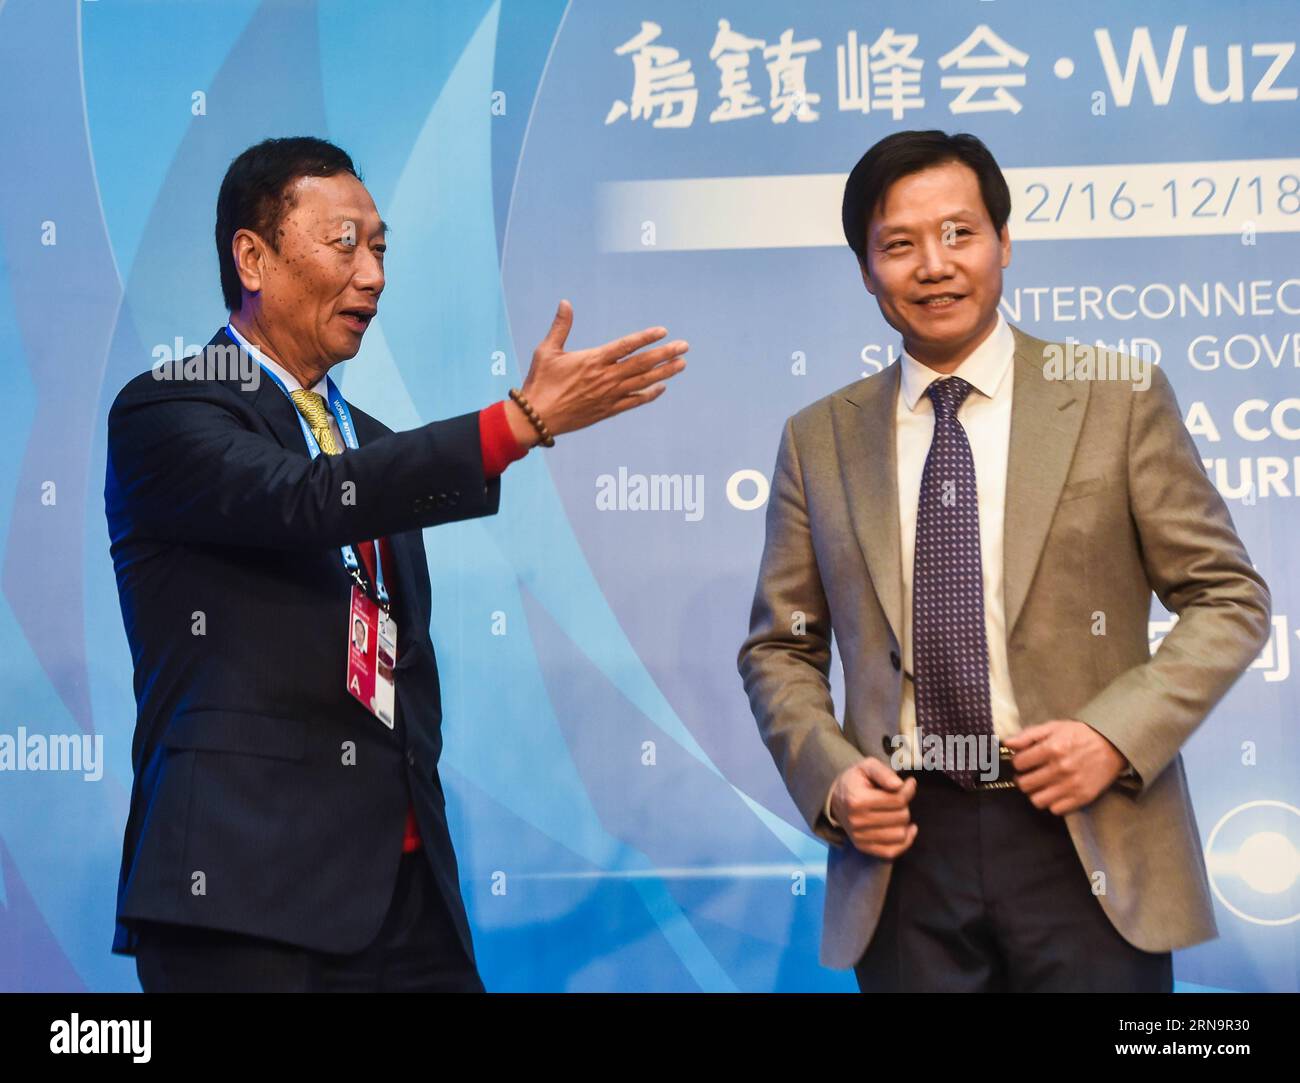 (151216) -- TONGXIANG, Dec. 16, 2015 -- Terry Gou (L), founder and CEO of Foxconn Technology Group, talks with Lei Jun, founder of Xiaomi Technology, during the Cross-Straits and Hong Kong, Macao Internet Development Forum of 2015 World Internet Conference in Wuzhen, east China s Zhejiang Province, Dec. 16, 2015. )(mcg) CHINA-ZHEJIANG-WUZHEN-WIC-SUB FORUM (CN) XuxYu PUBLICATIONxNOTxINxCHN   151216 Tong Xiang DEC 16 2015 Terry Gou l Founder and CEO of Foxconn Technology Group Talks With Lei jun Founder of Xiaomi Technology during The Cross Straits and Hong Kong Macao Internet Development Forum Stock Photo